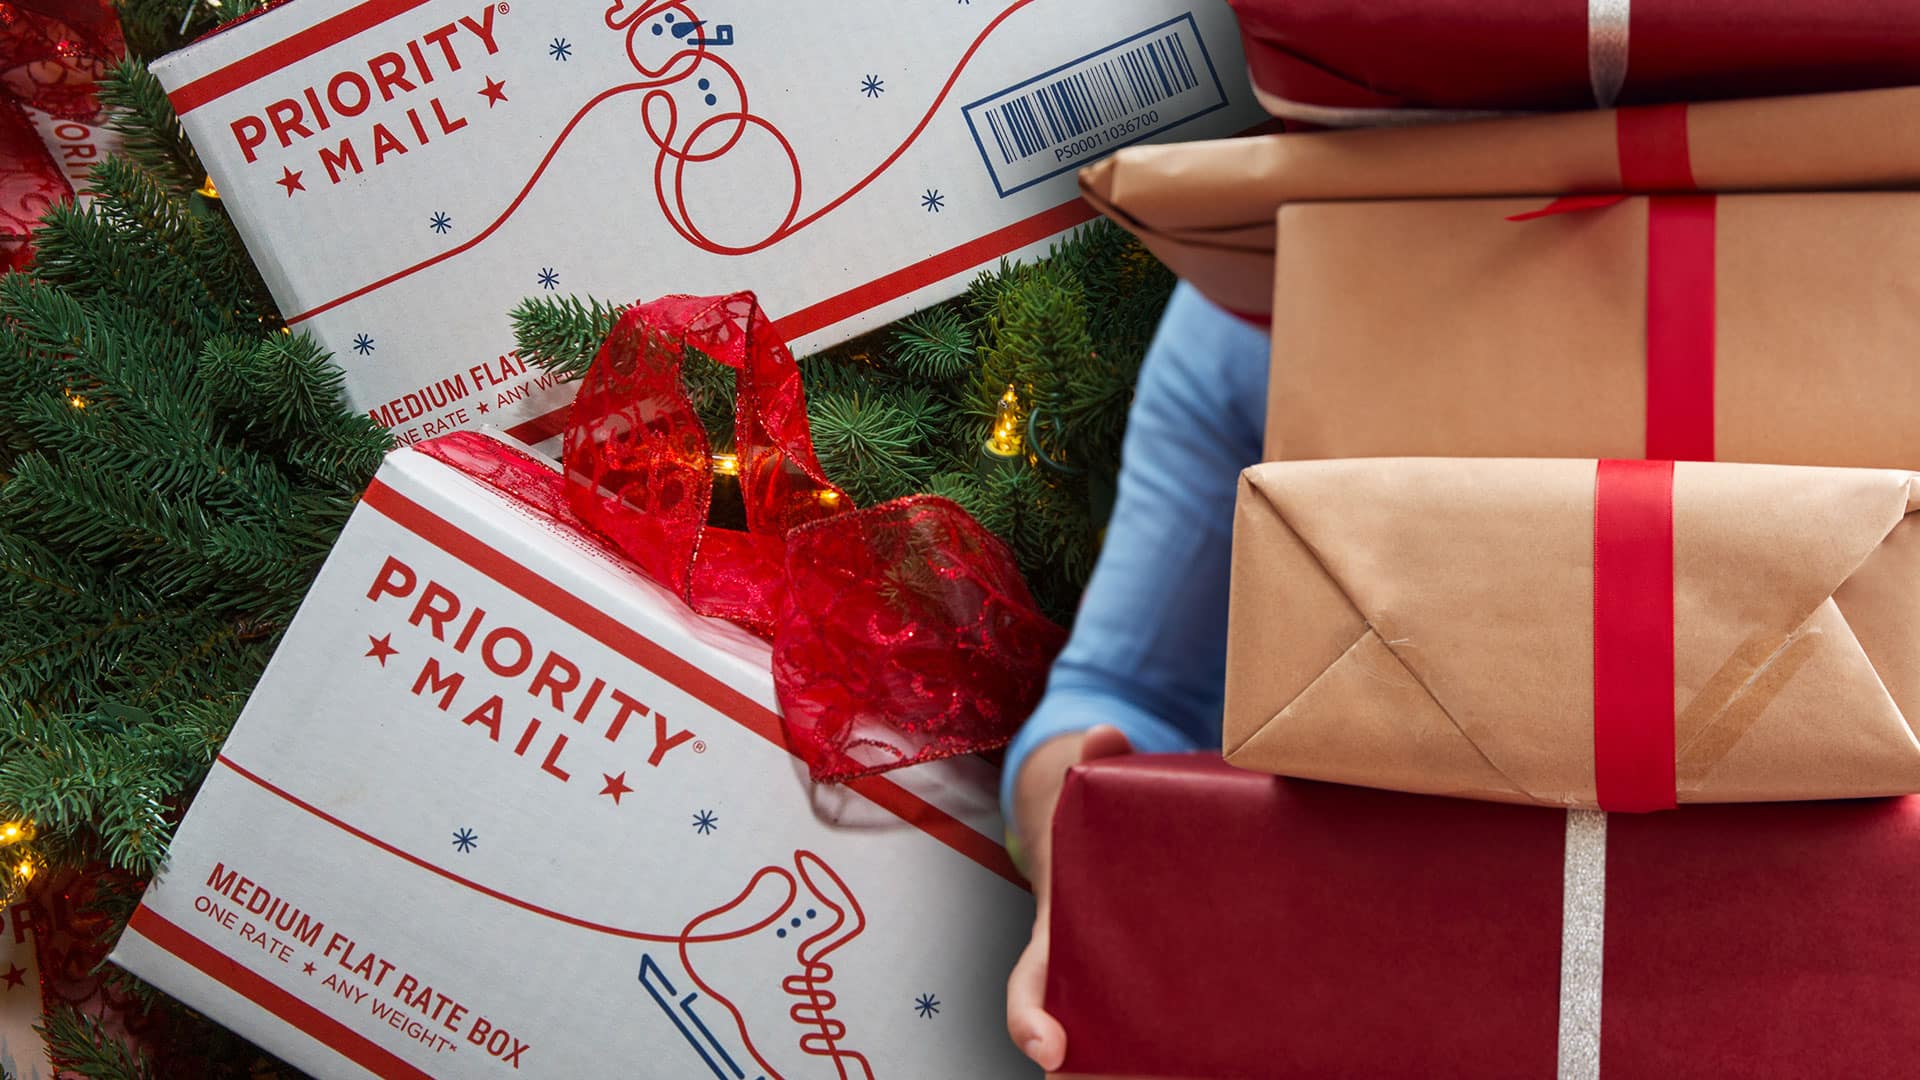 Priority Mail boxes by christmas tree and person holding holiday packages